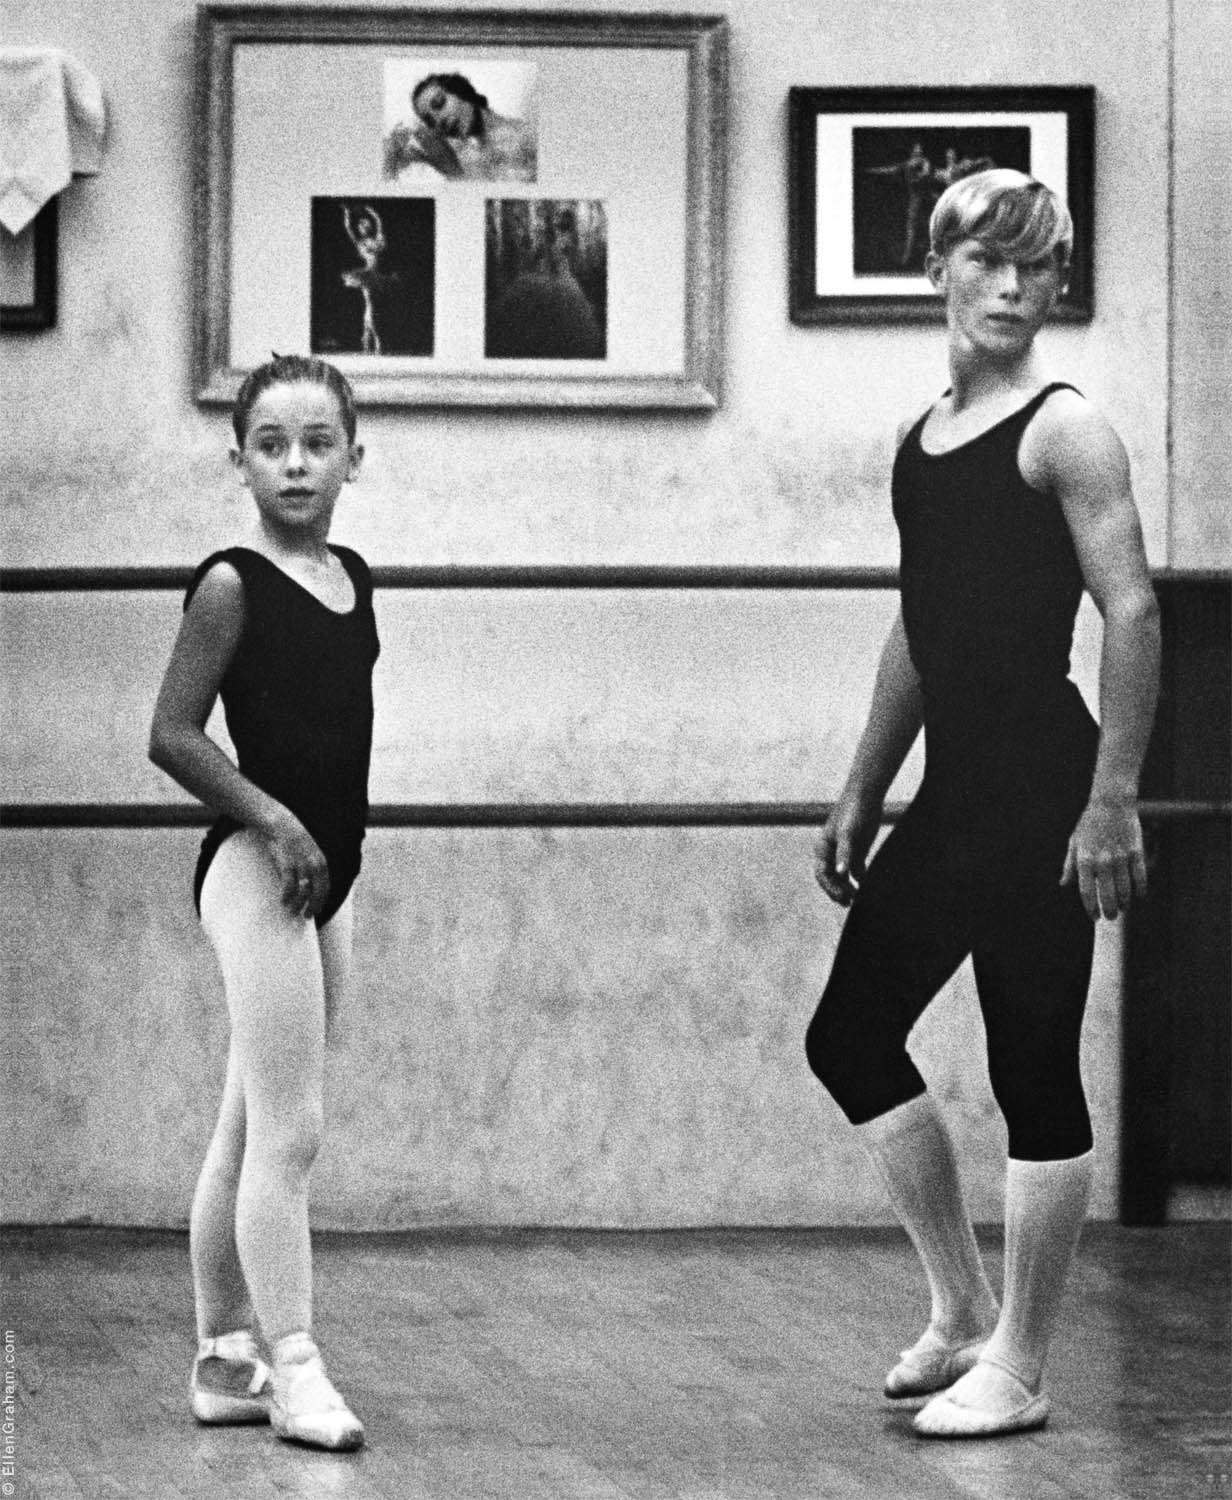 Dance Students, George Zoritch Dance School, West Hollywood, CA, 1966